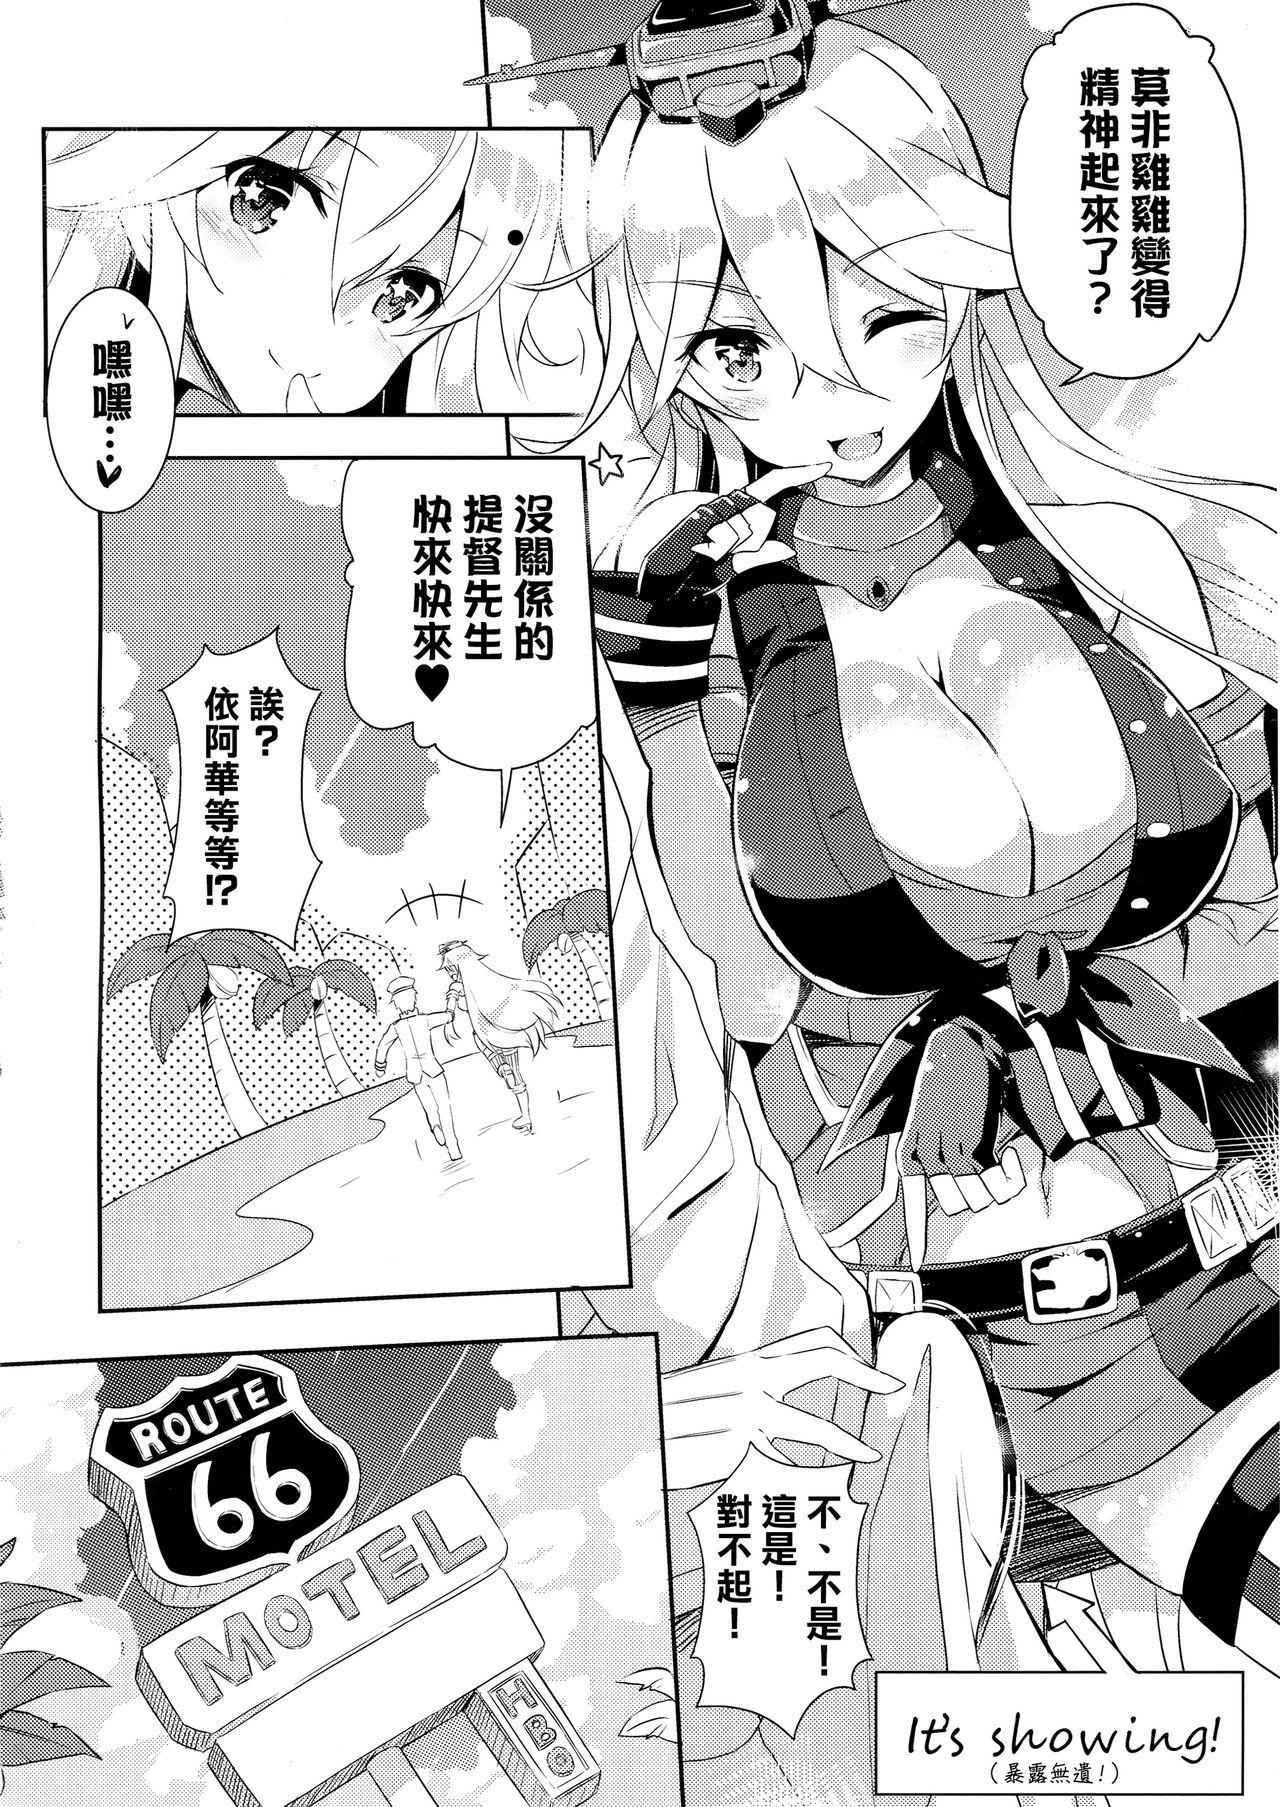 Goth CUTE GIRL! THE AMERICAN! - Kantai collection Vaginal - Page 8